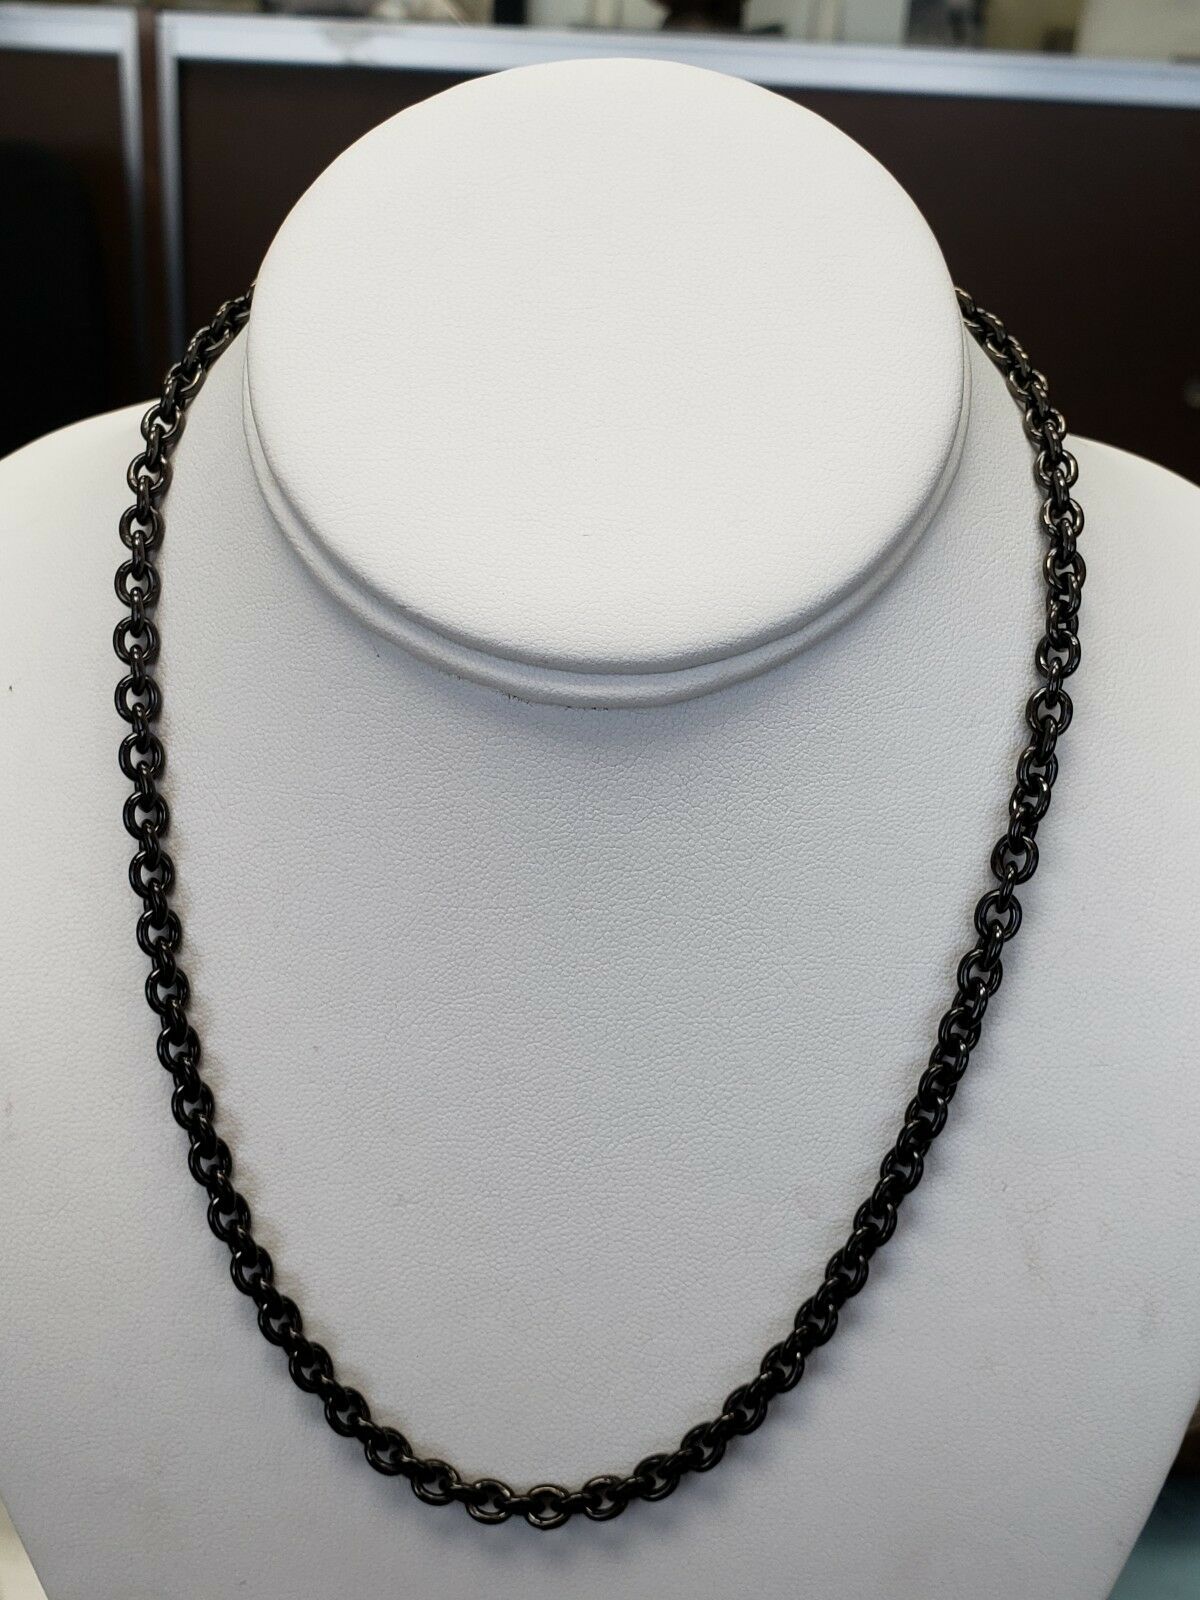 Rolo Blackened Oxidized Sterling Silver Chains 24"